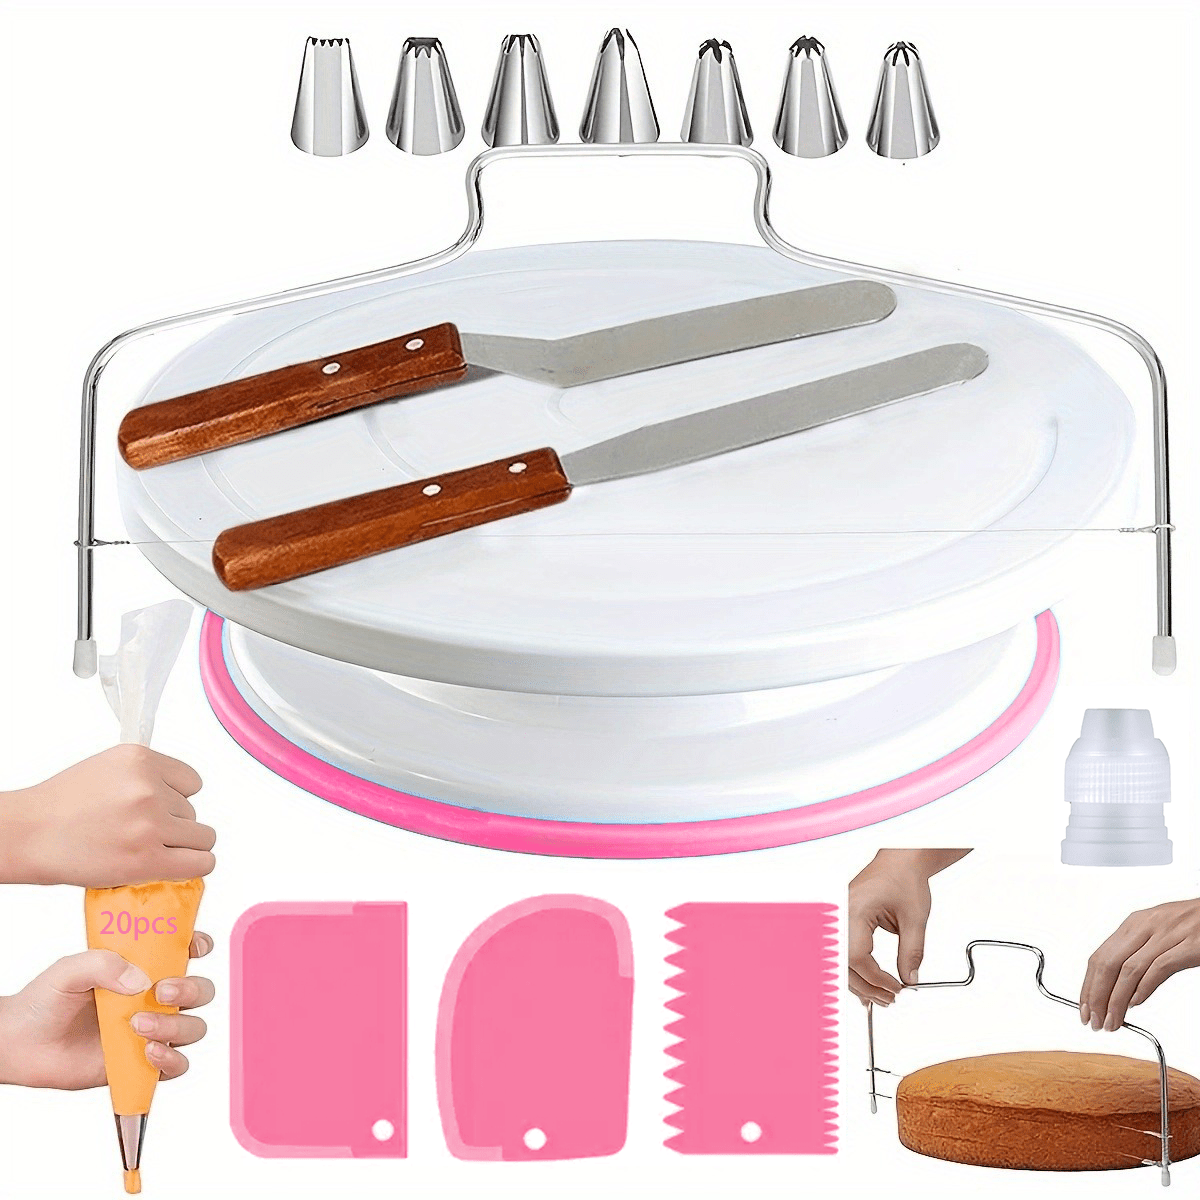 

35-piece Stainless Steel Cake Decorating Kit With Turntable, Piping Tips, Reusable Pastry Bags, Icing Spatulas & More - Complete Baking Tools Set For Diy Cakes And